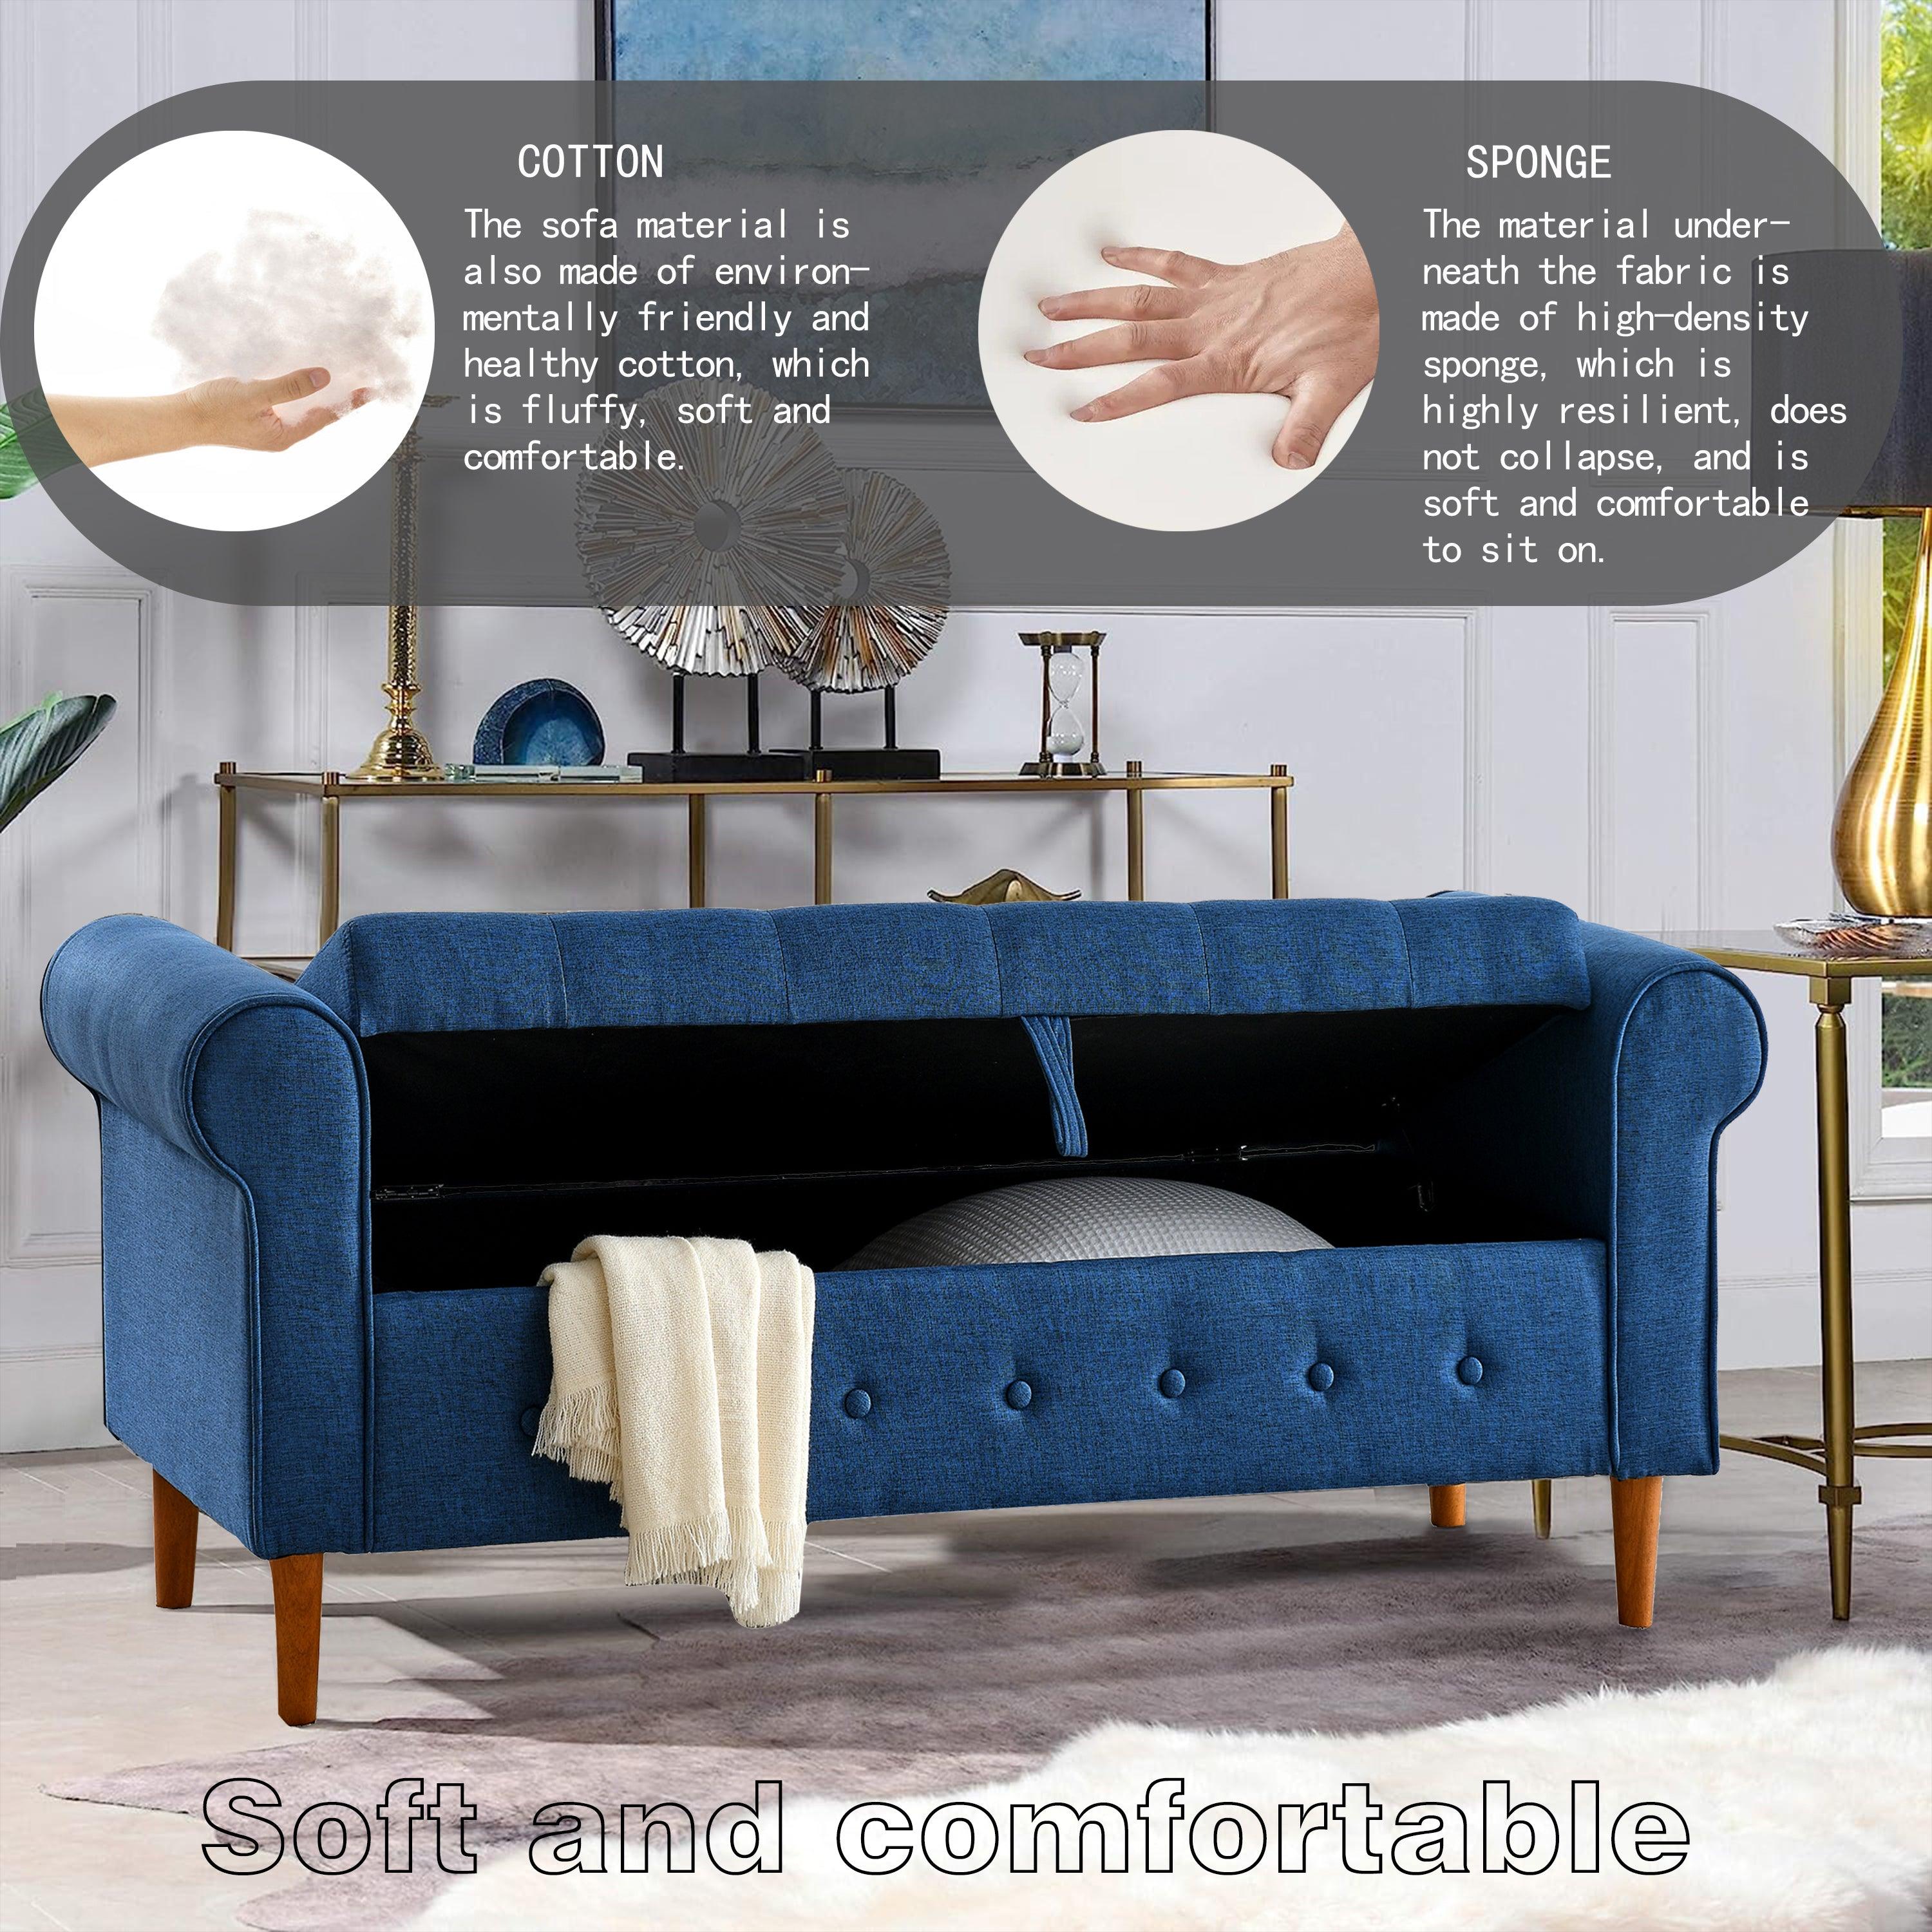 62" Bedroom Tufted Button Storage Bench, Linen Upholstered Ottoman, Window Bench, Rolled Arm Design For Bedroom, Living Room, Foyer (Blue)